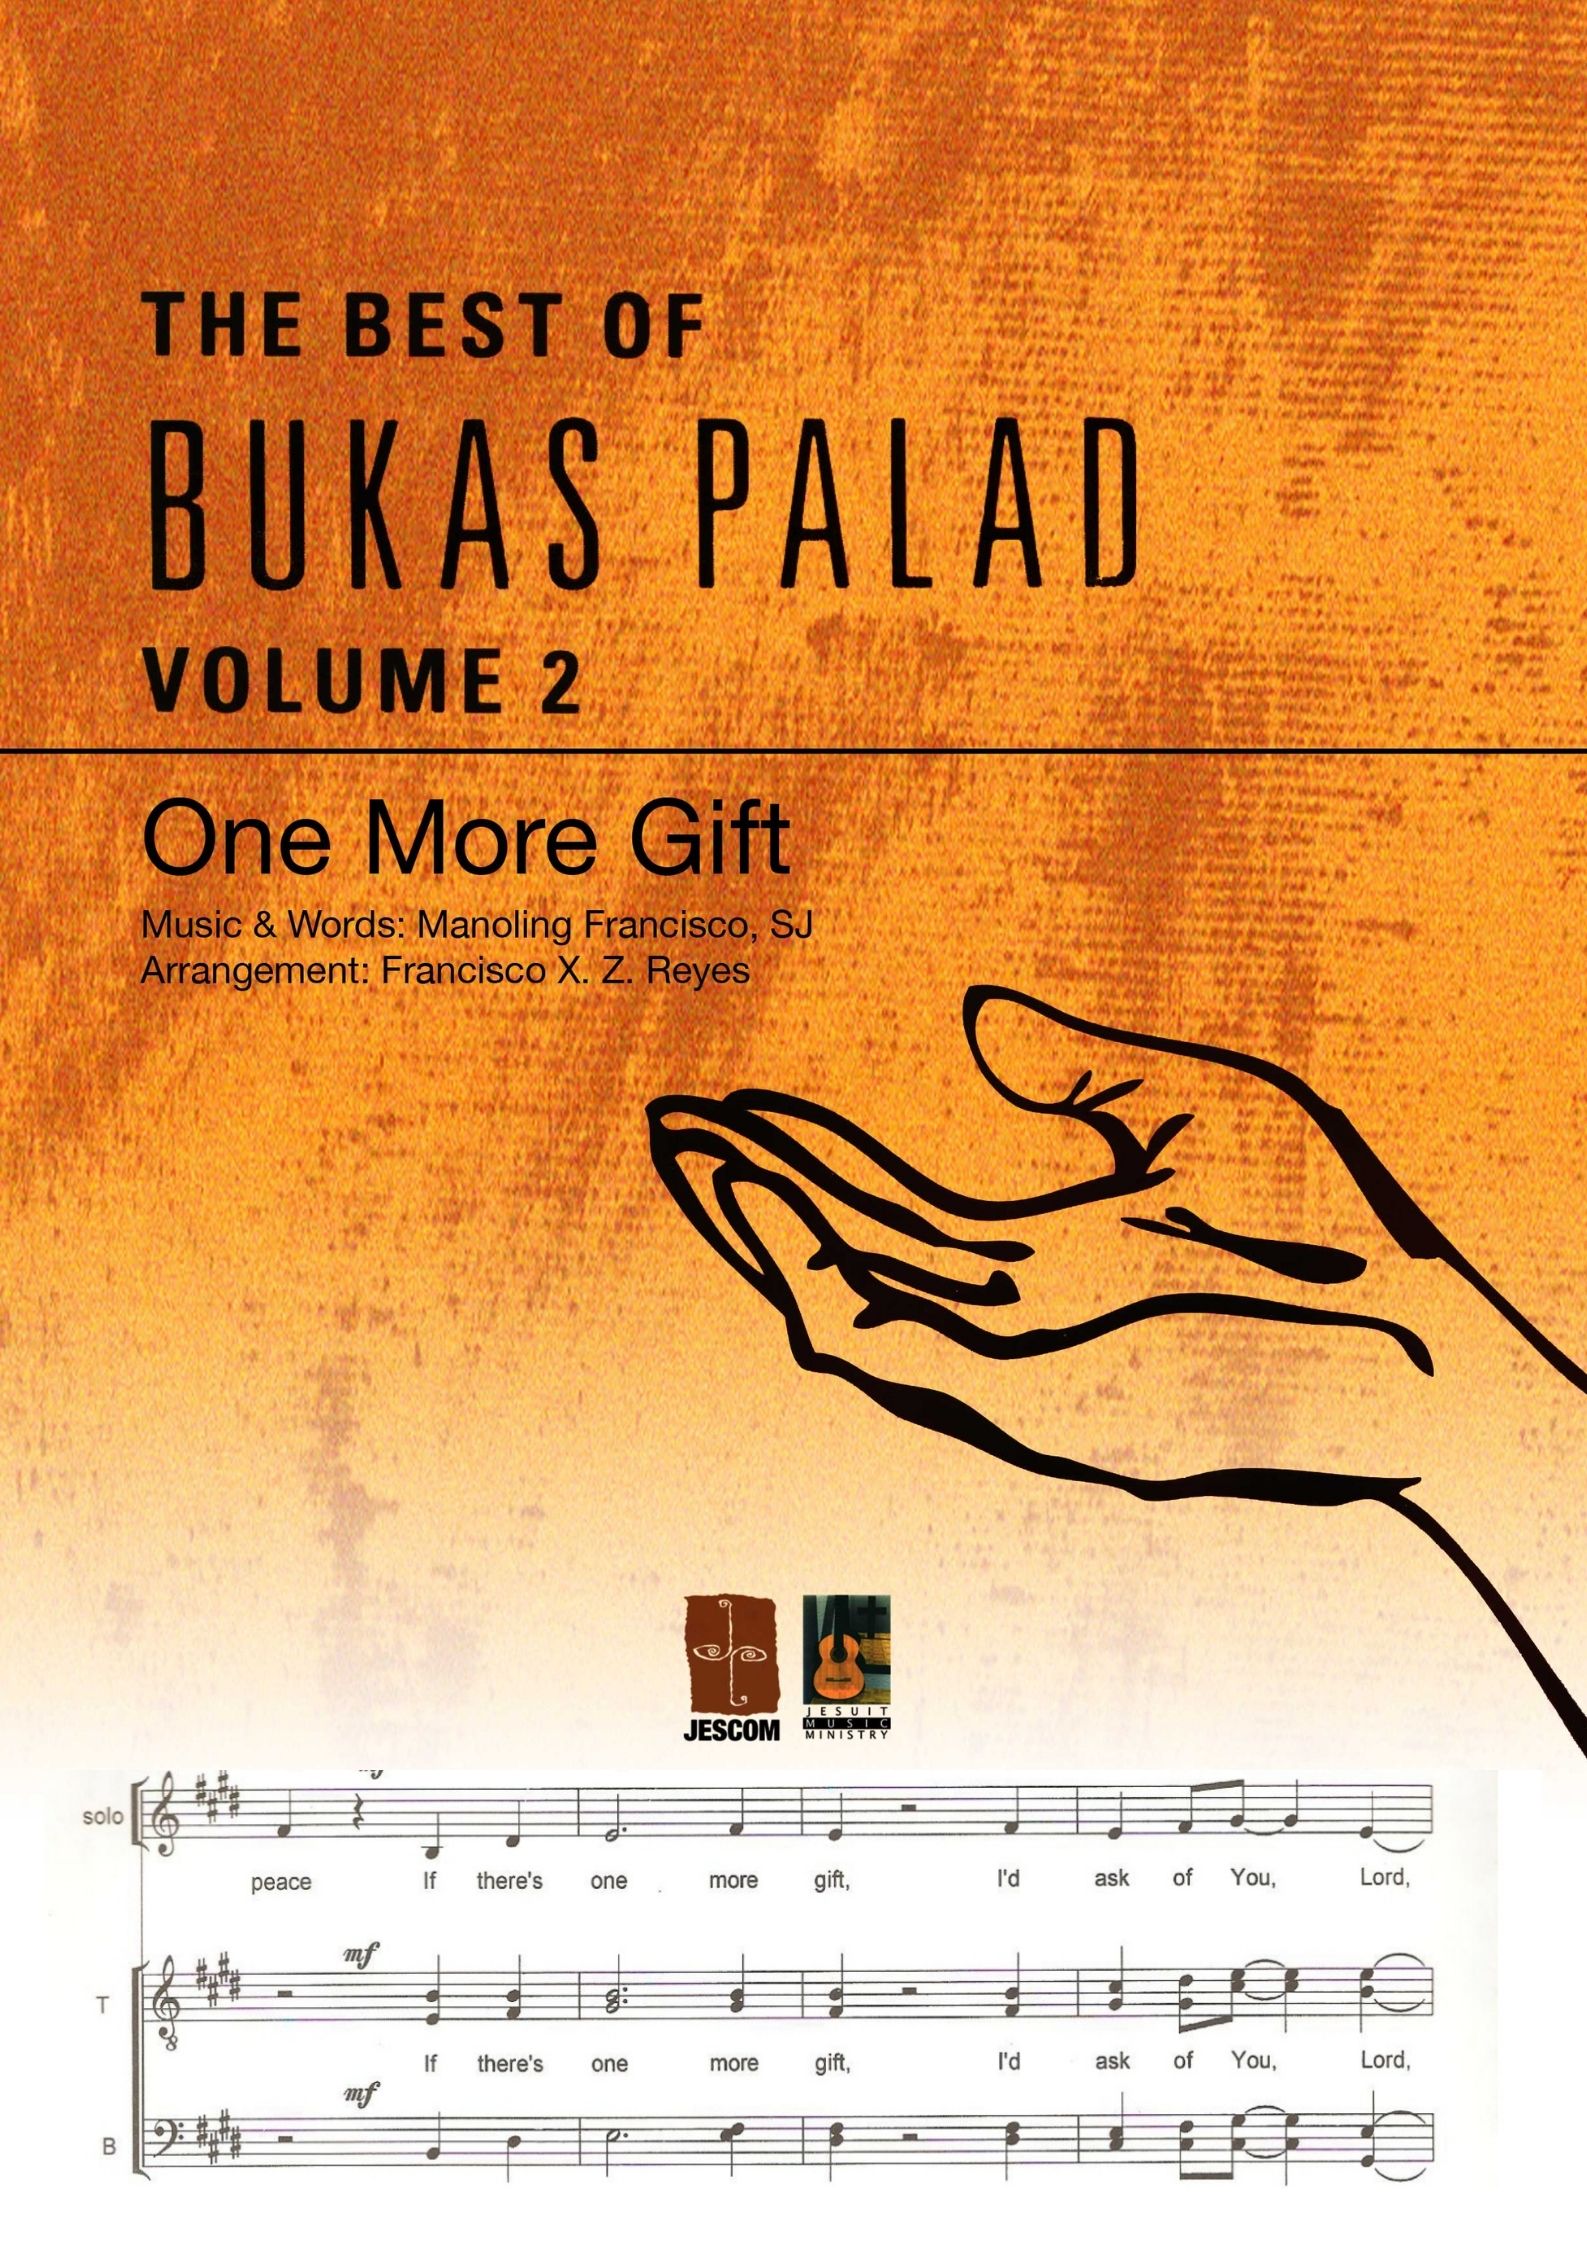 One More Gift – Music Sheet